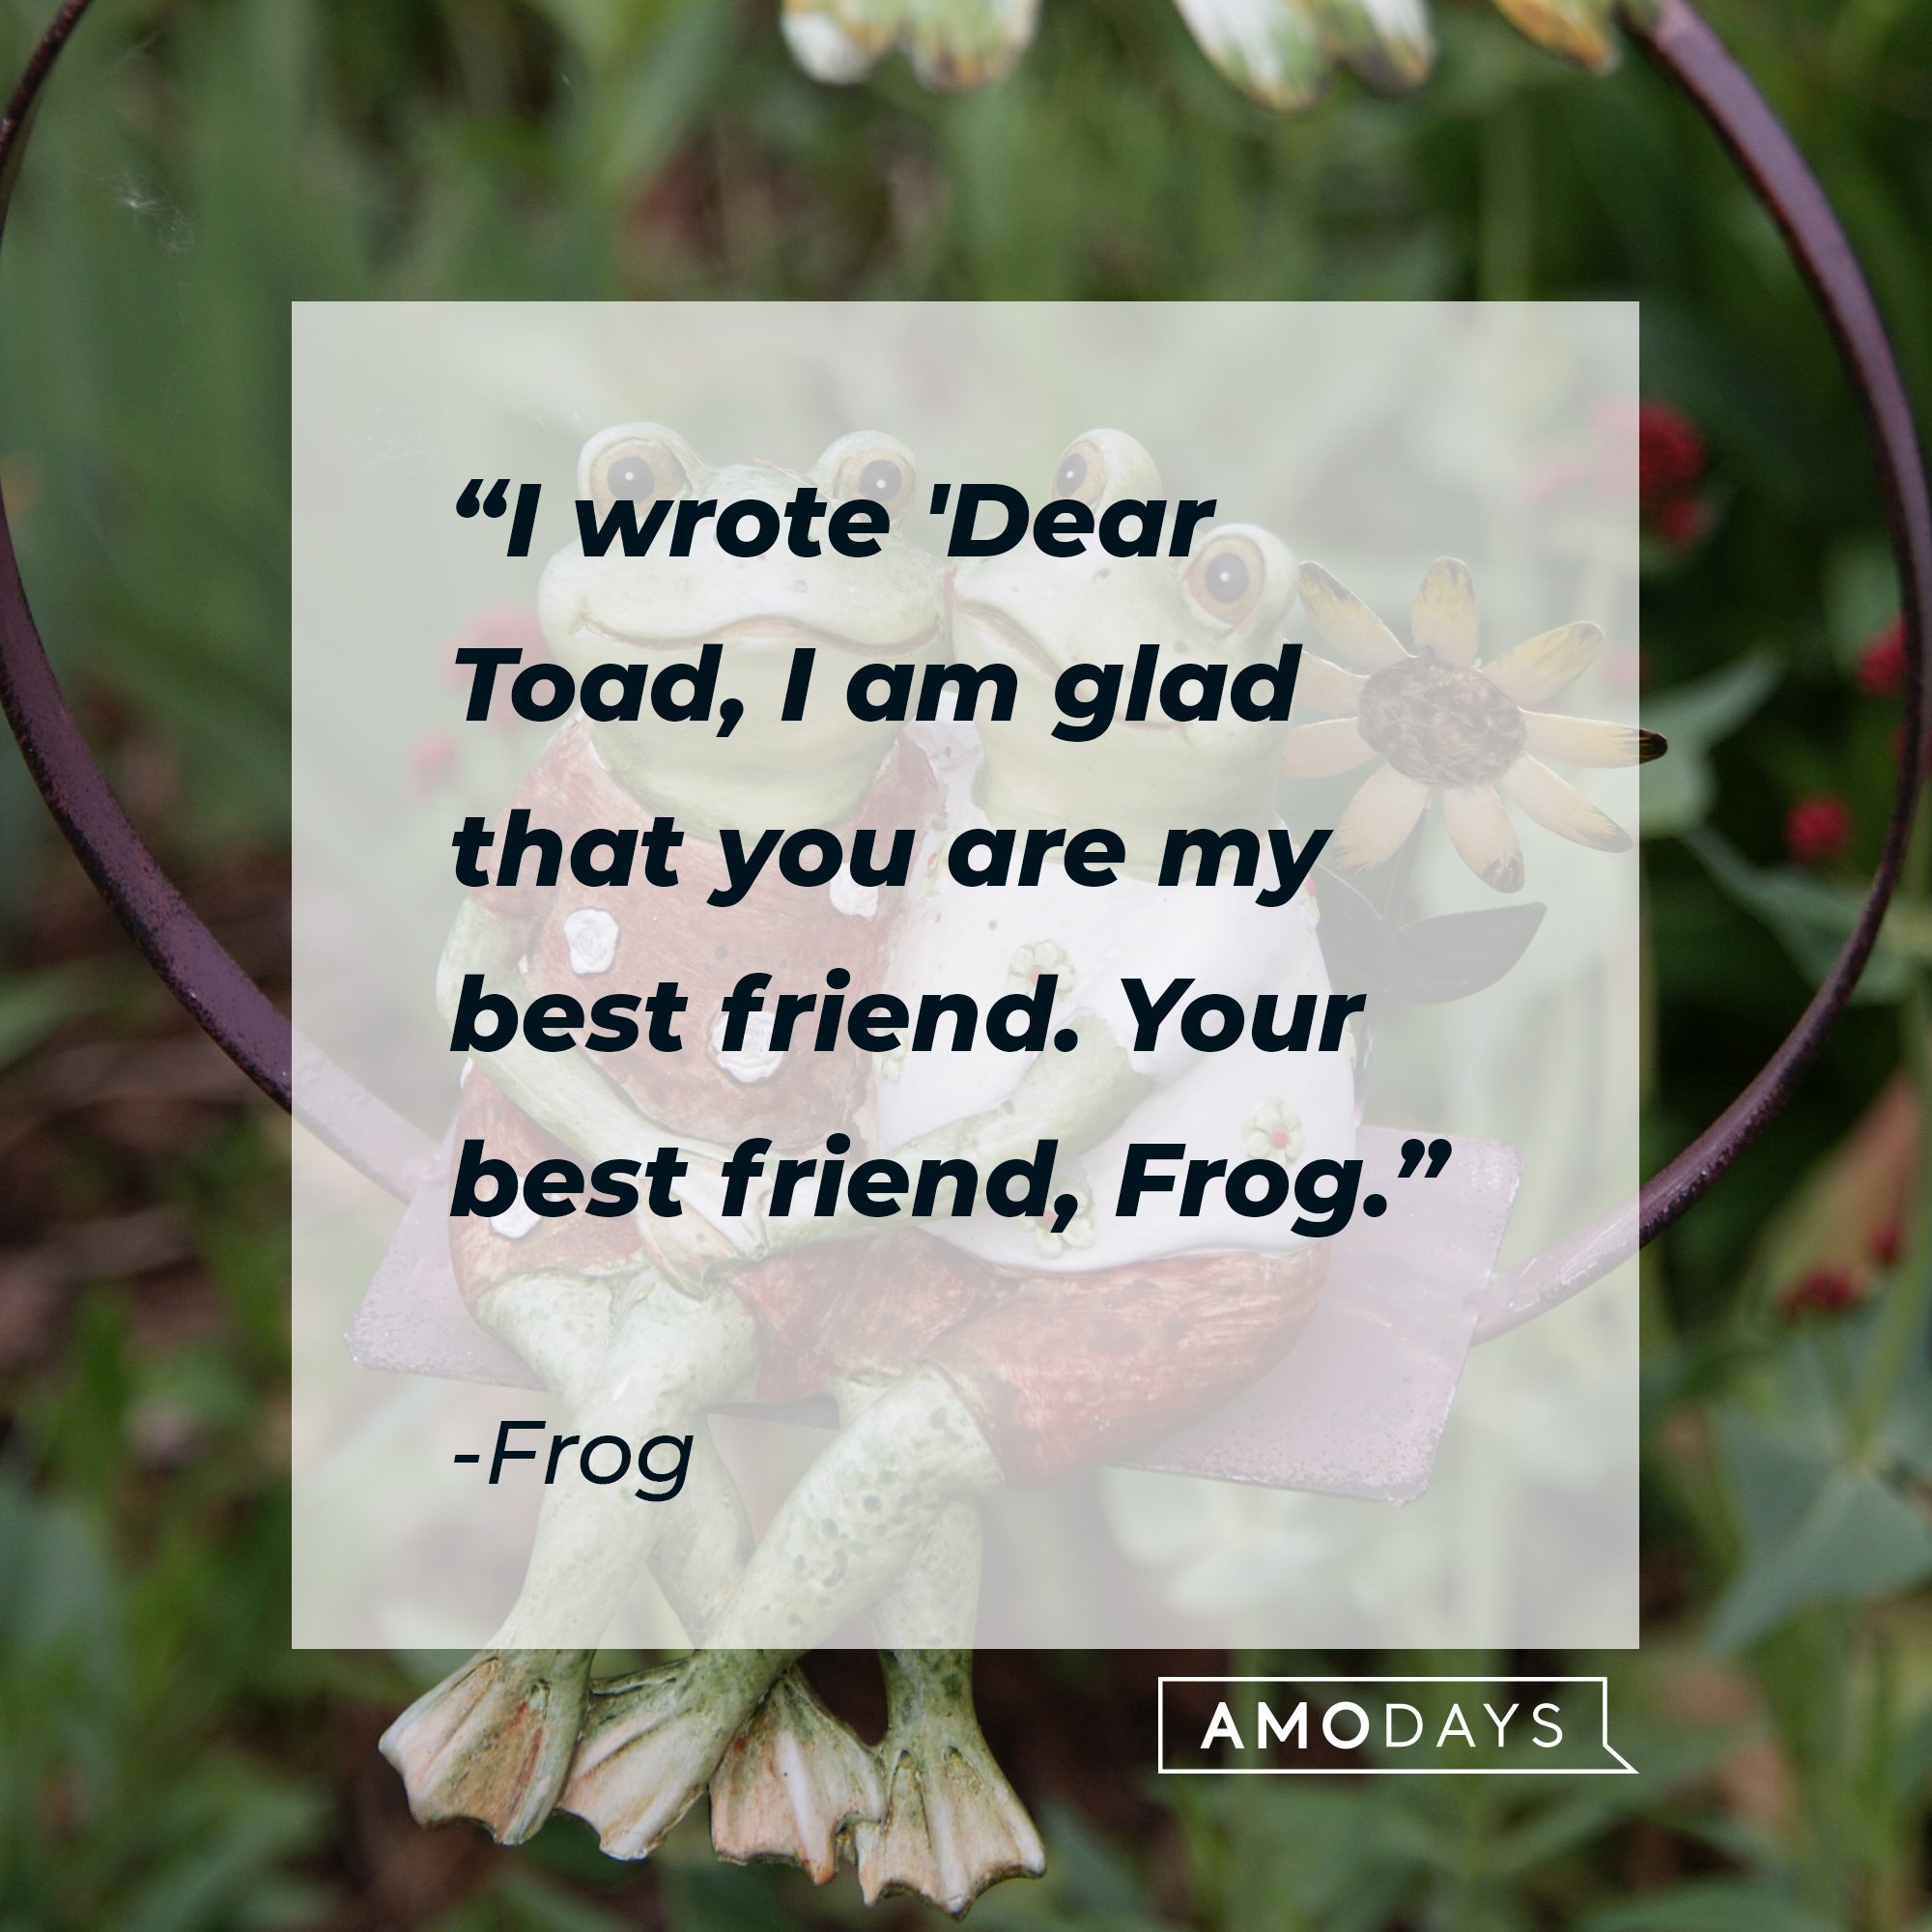 Frog's quote: "I wrote 'Dear Toad, I am glad that you are my best friend. Your best friend, Frog.'" | Image: AmoDays